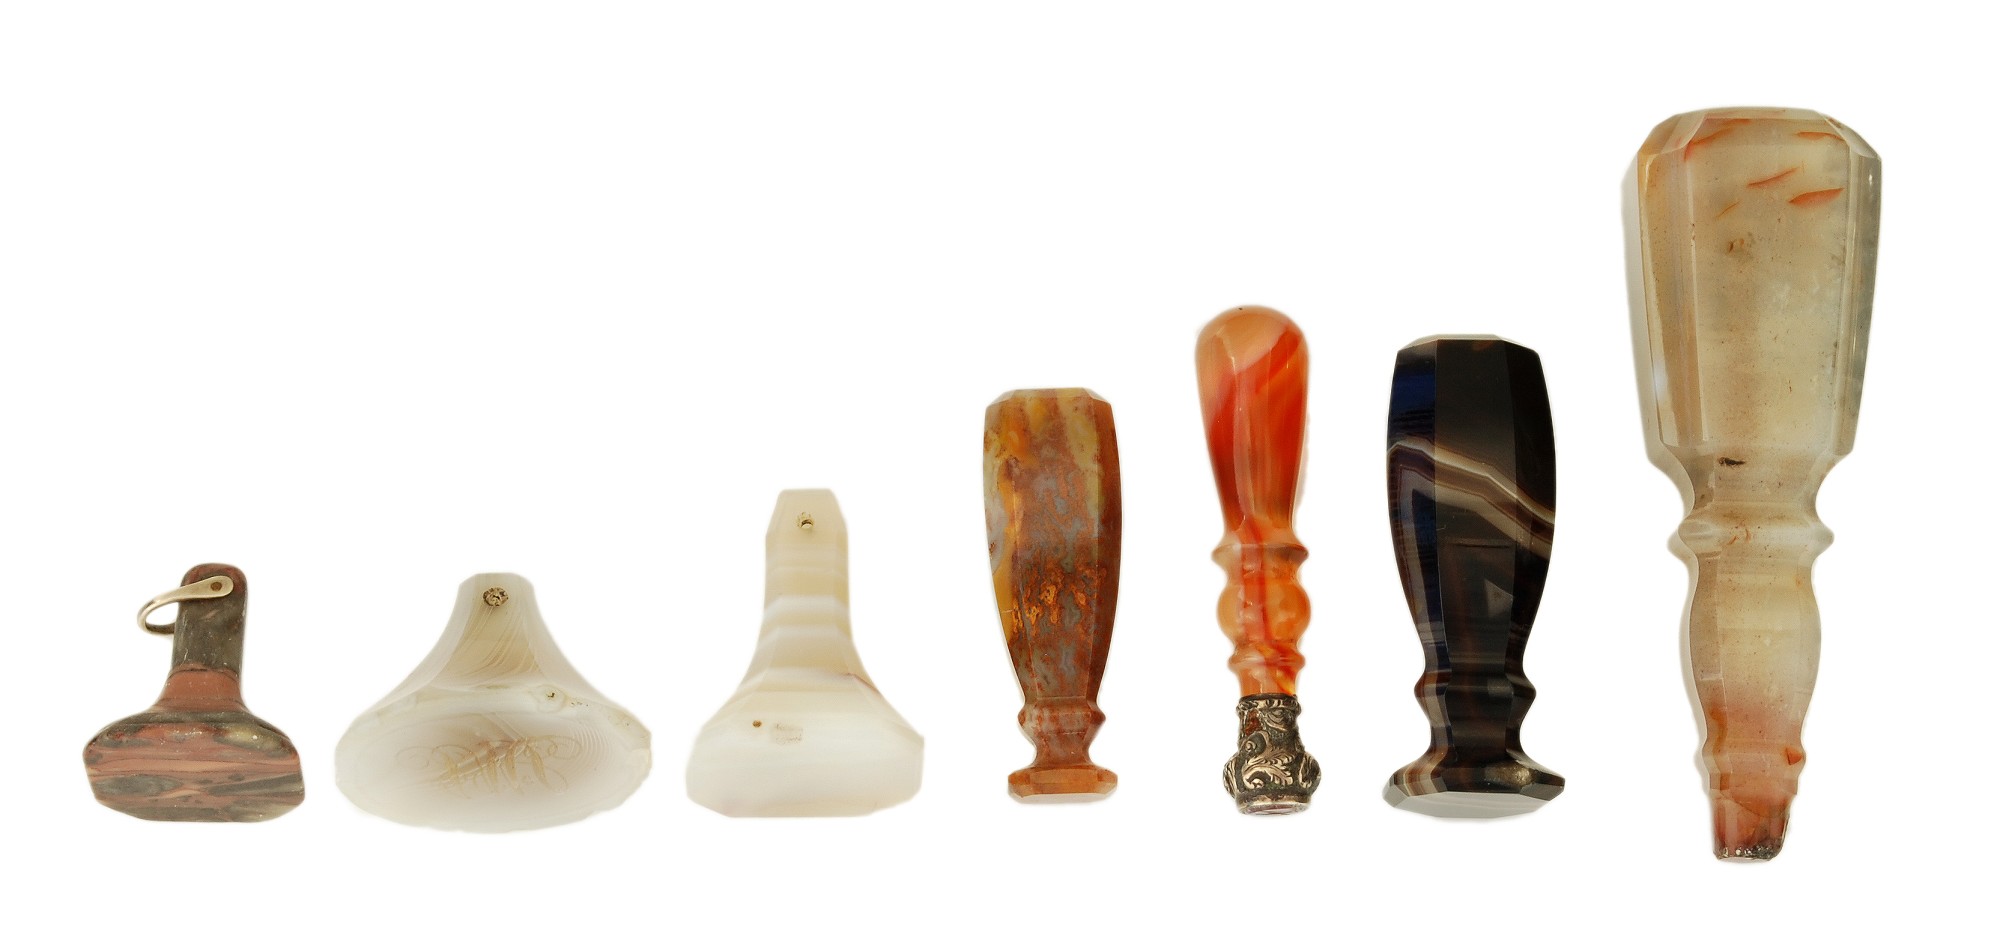 Seven small agate seals, 19th century, including: an orange banded desk example, with a chased